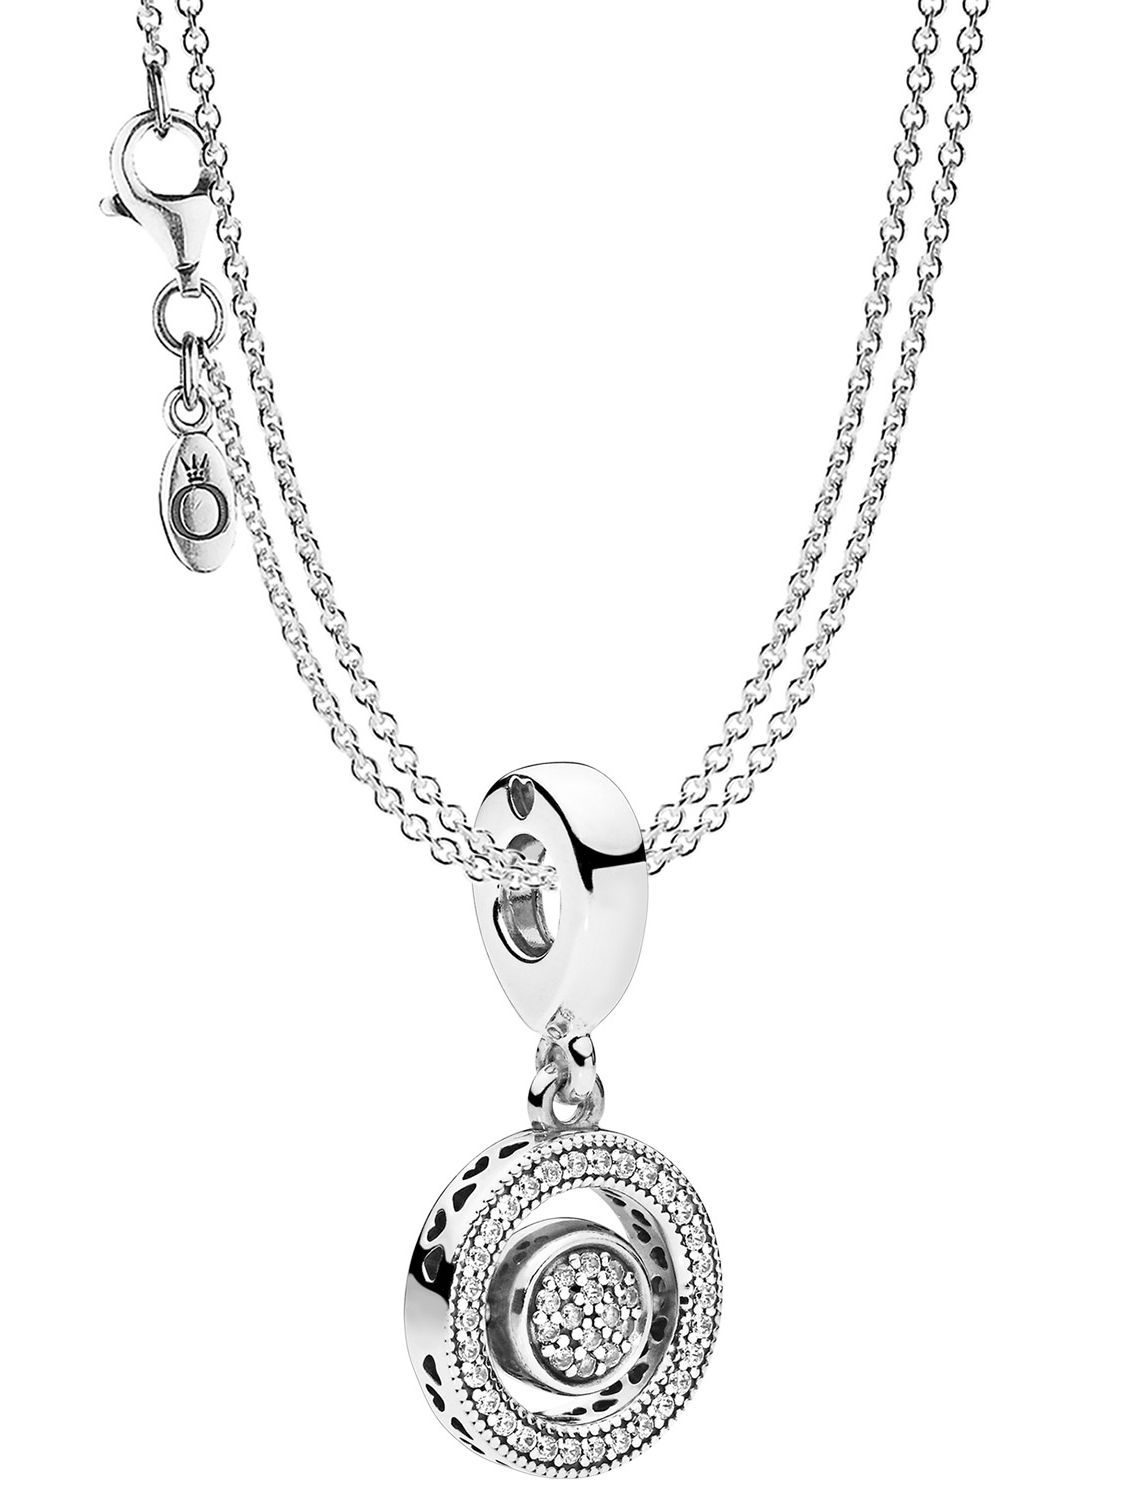 Pandora 08591 Necklace With Charm Pendant Logo Intended For Most Up To Date Pandora Lockets Logo Necklaces (View 1 of 25)